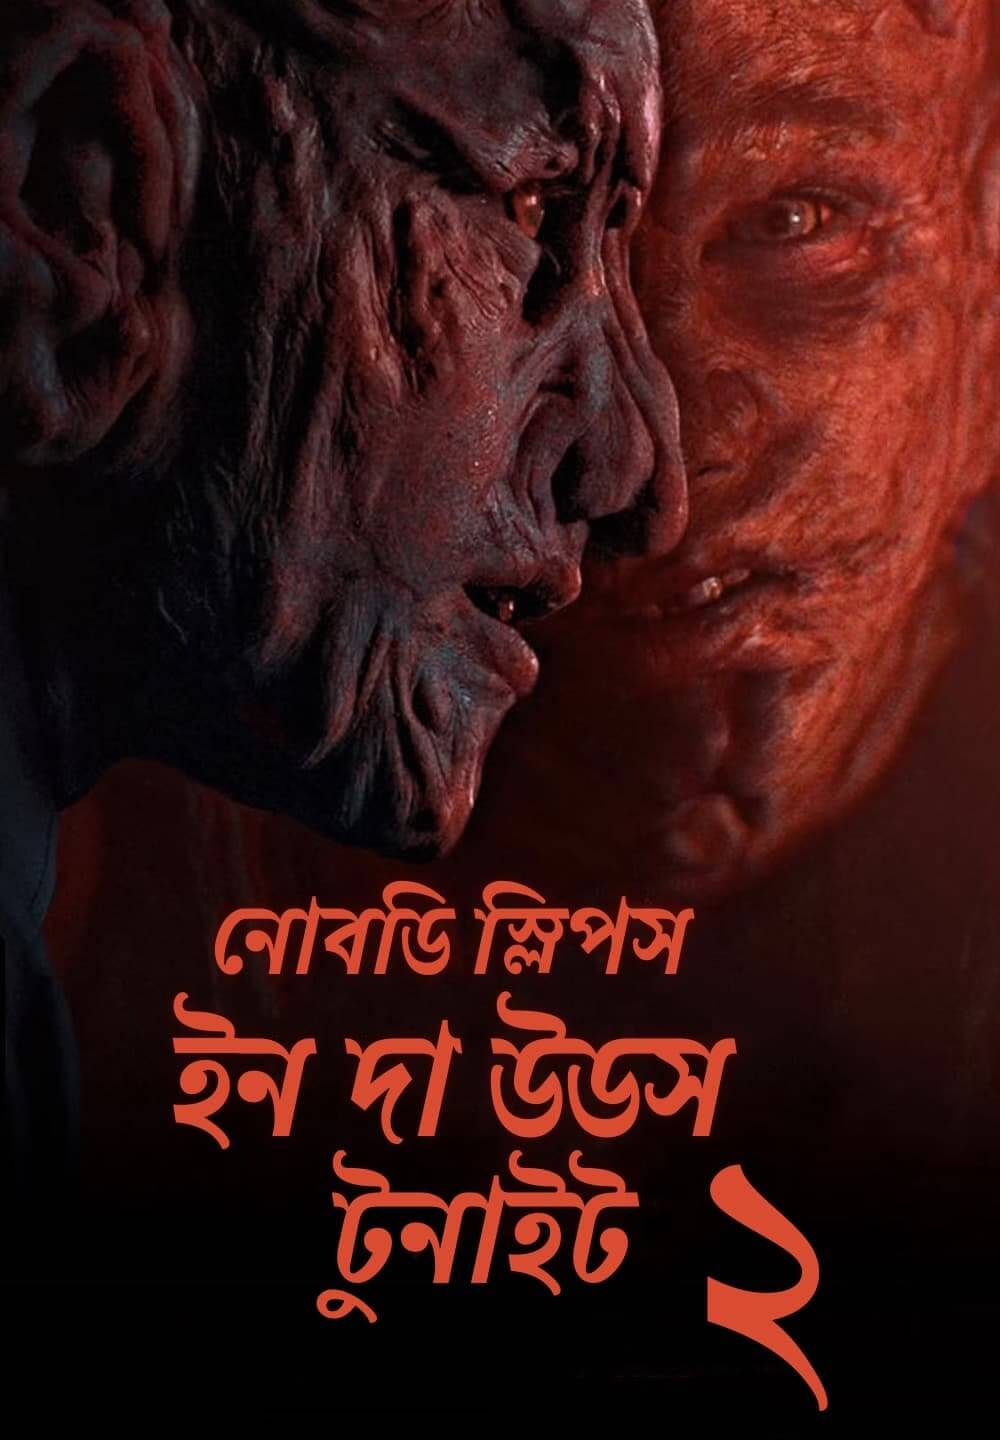 Nobody Sleeps In The Woods Tonight 2 2021 Bengali Dubbed Movie 720p HDRip 700MB Download